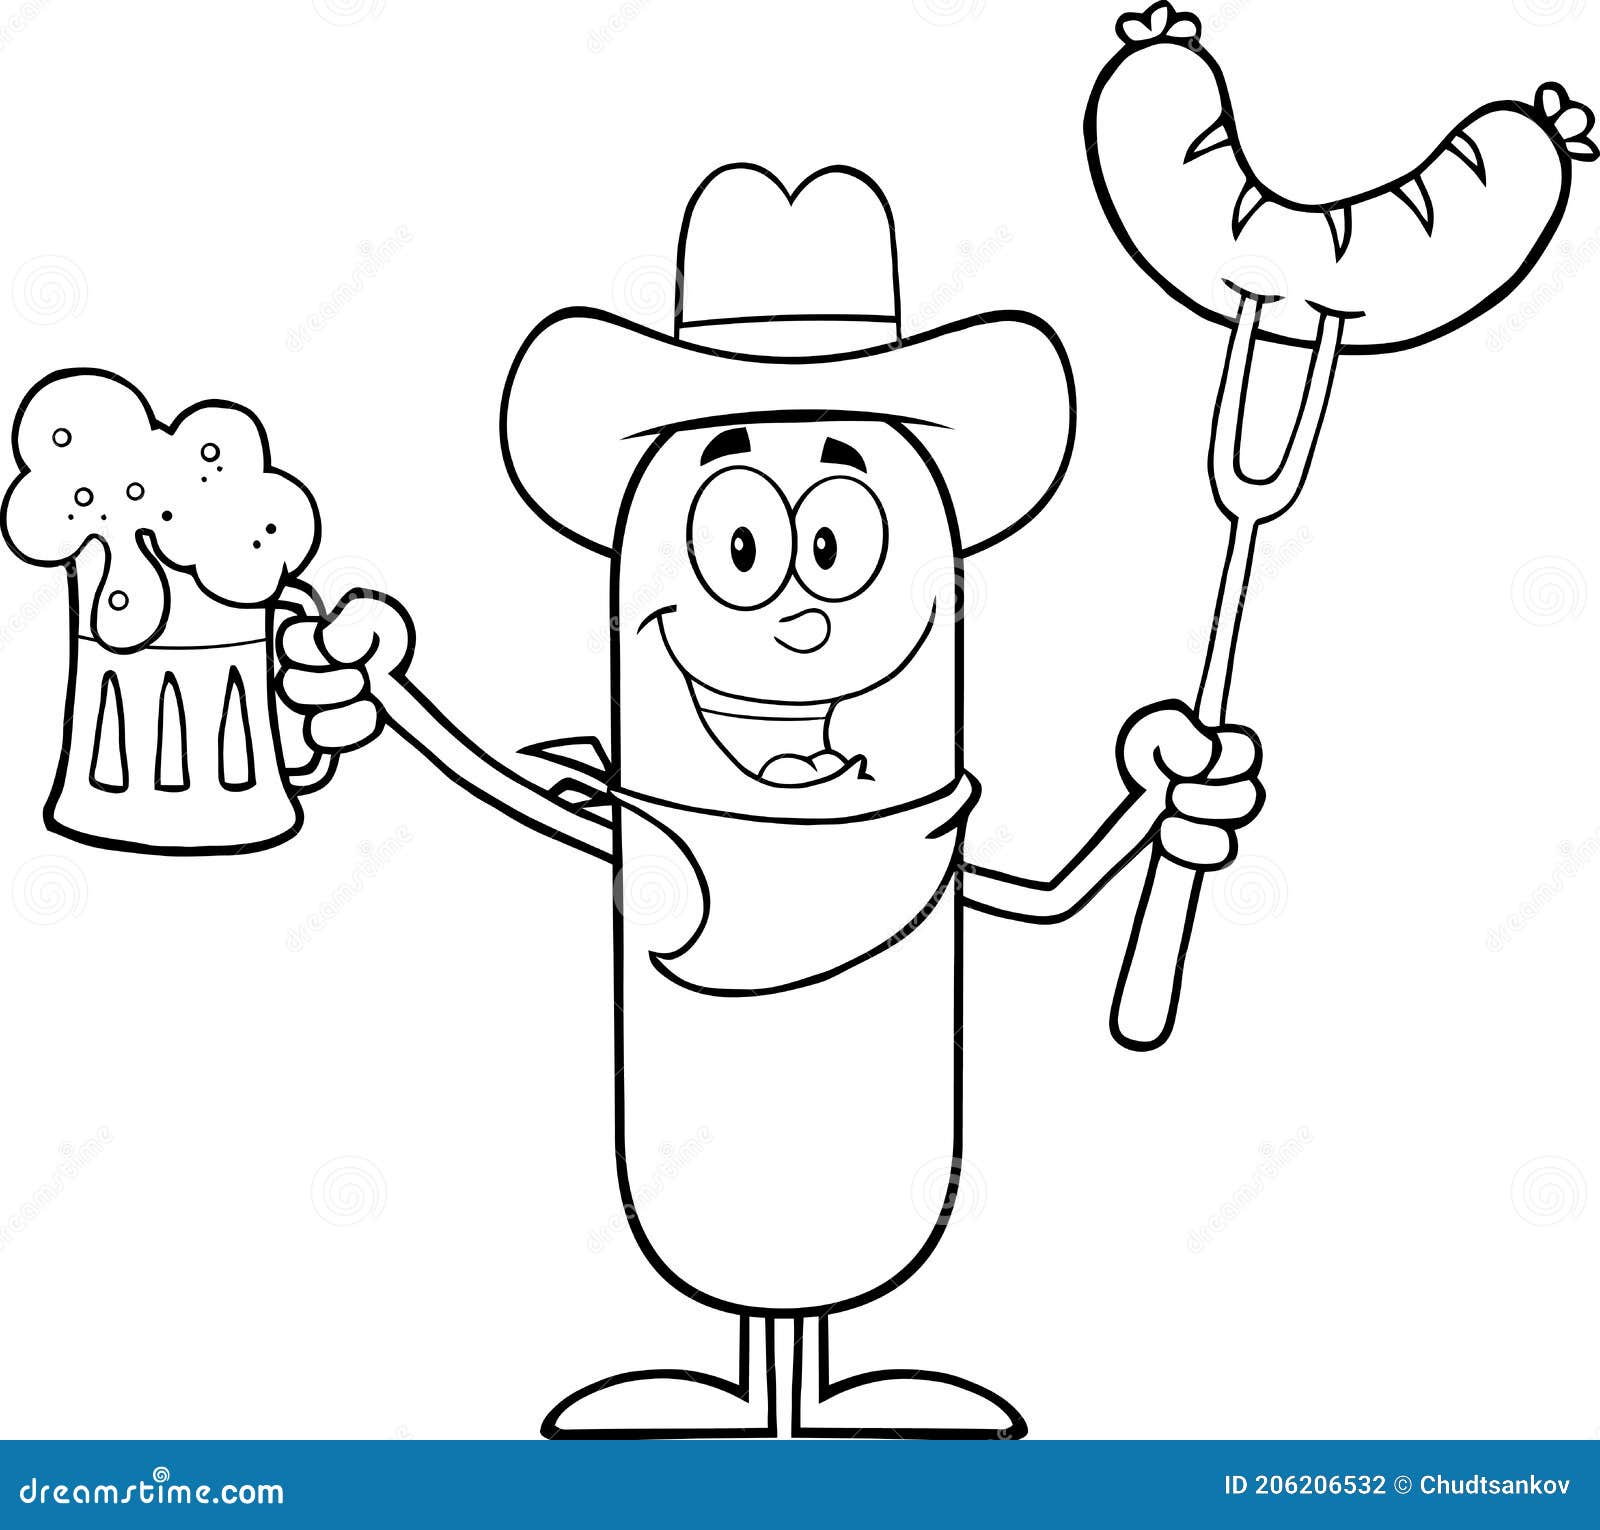 Black and White Cowboy Sausage Cartoon Character Holding a Beer and Weenie  on a Fork Stock Illustration - Illustration of alcohol, cooked: 206206532